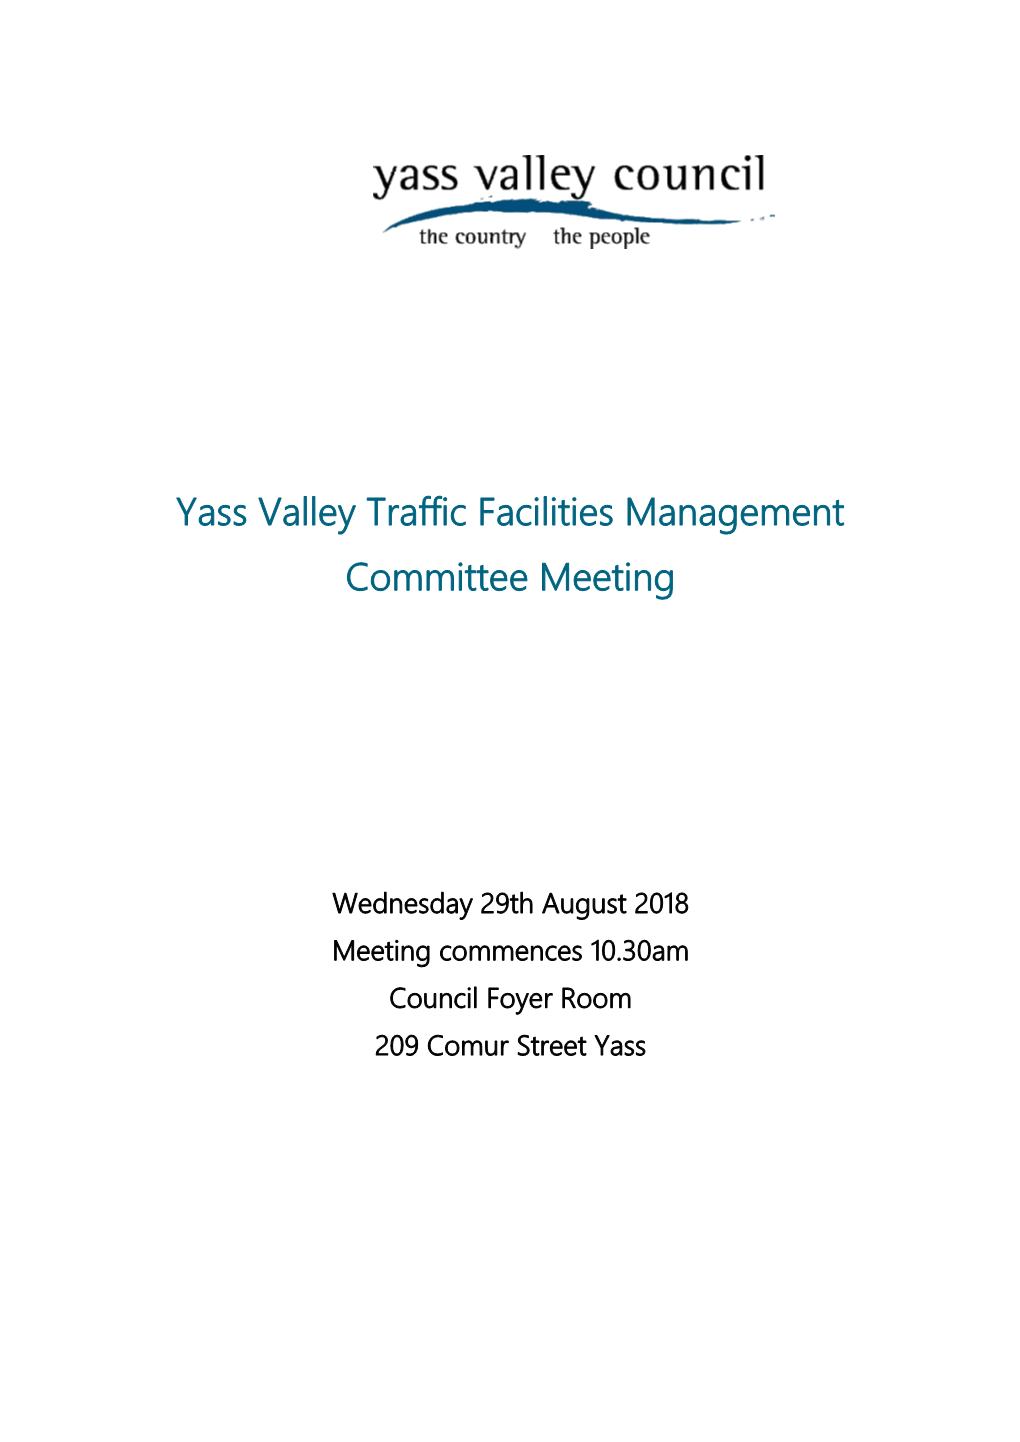 Yass Valley Traffic Facilities Management Committee Meeting